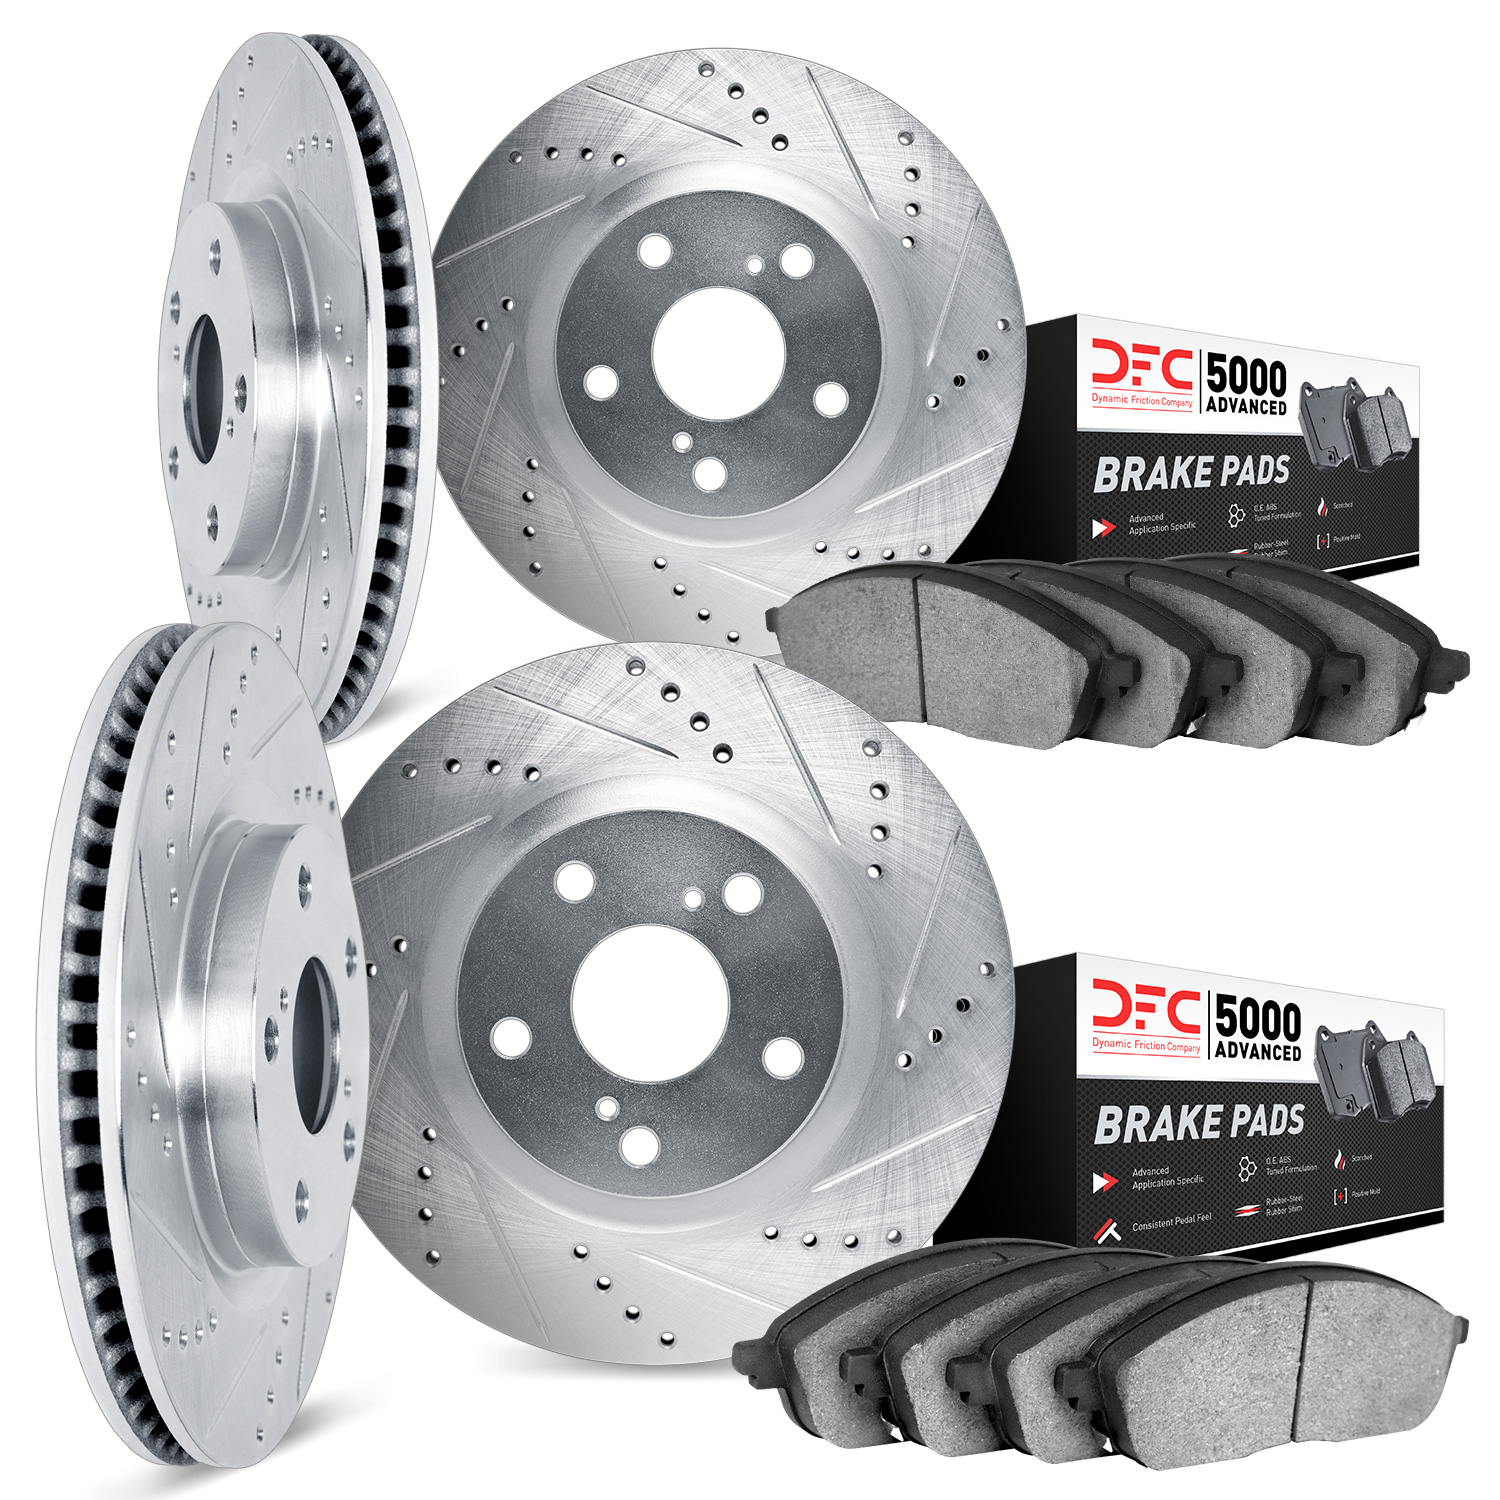 7504-40244 Drilled/Slotted Brake Rotors w/5000 Advanced Brake Pads Kit [Silver], 2004-2004 Mopar, Position: Front and Rear